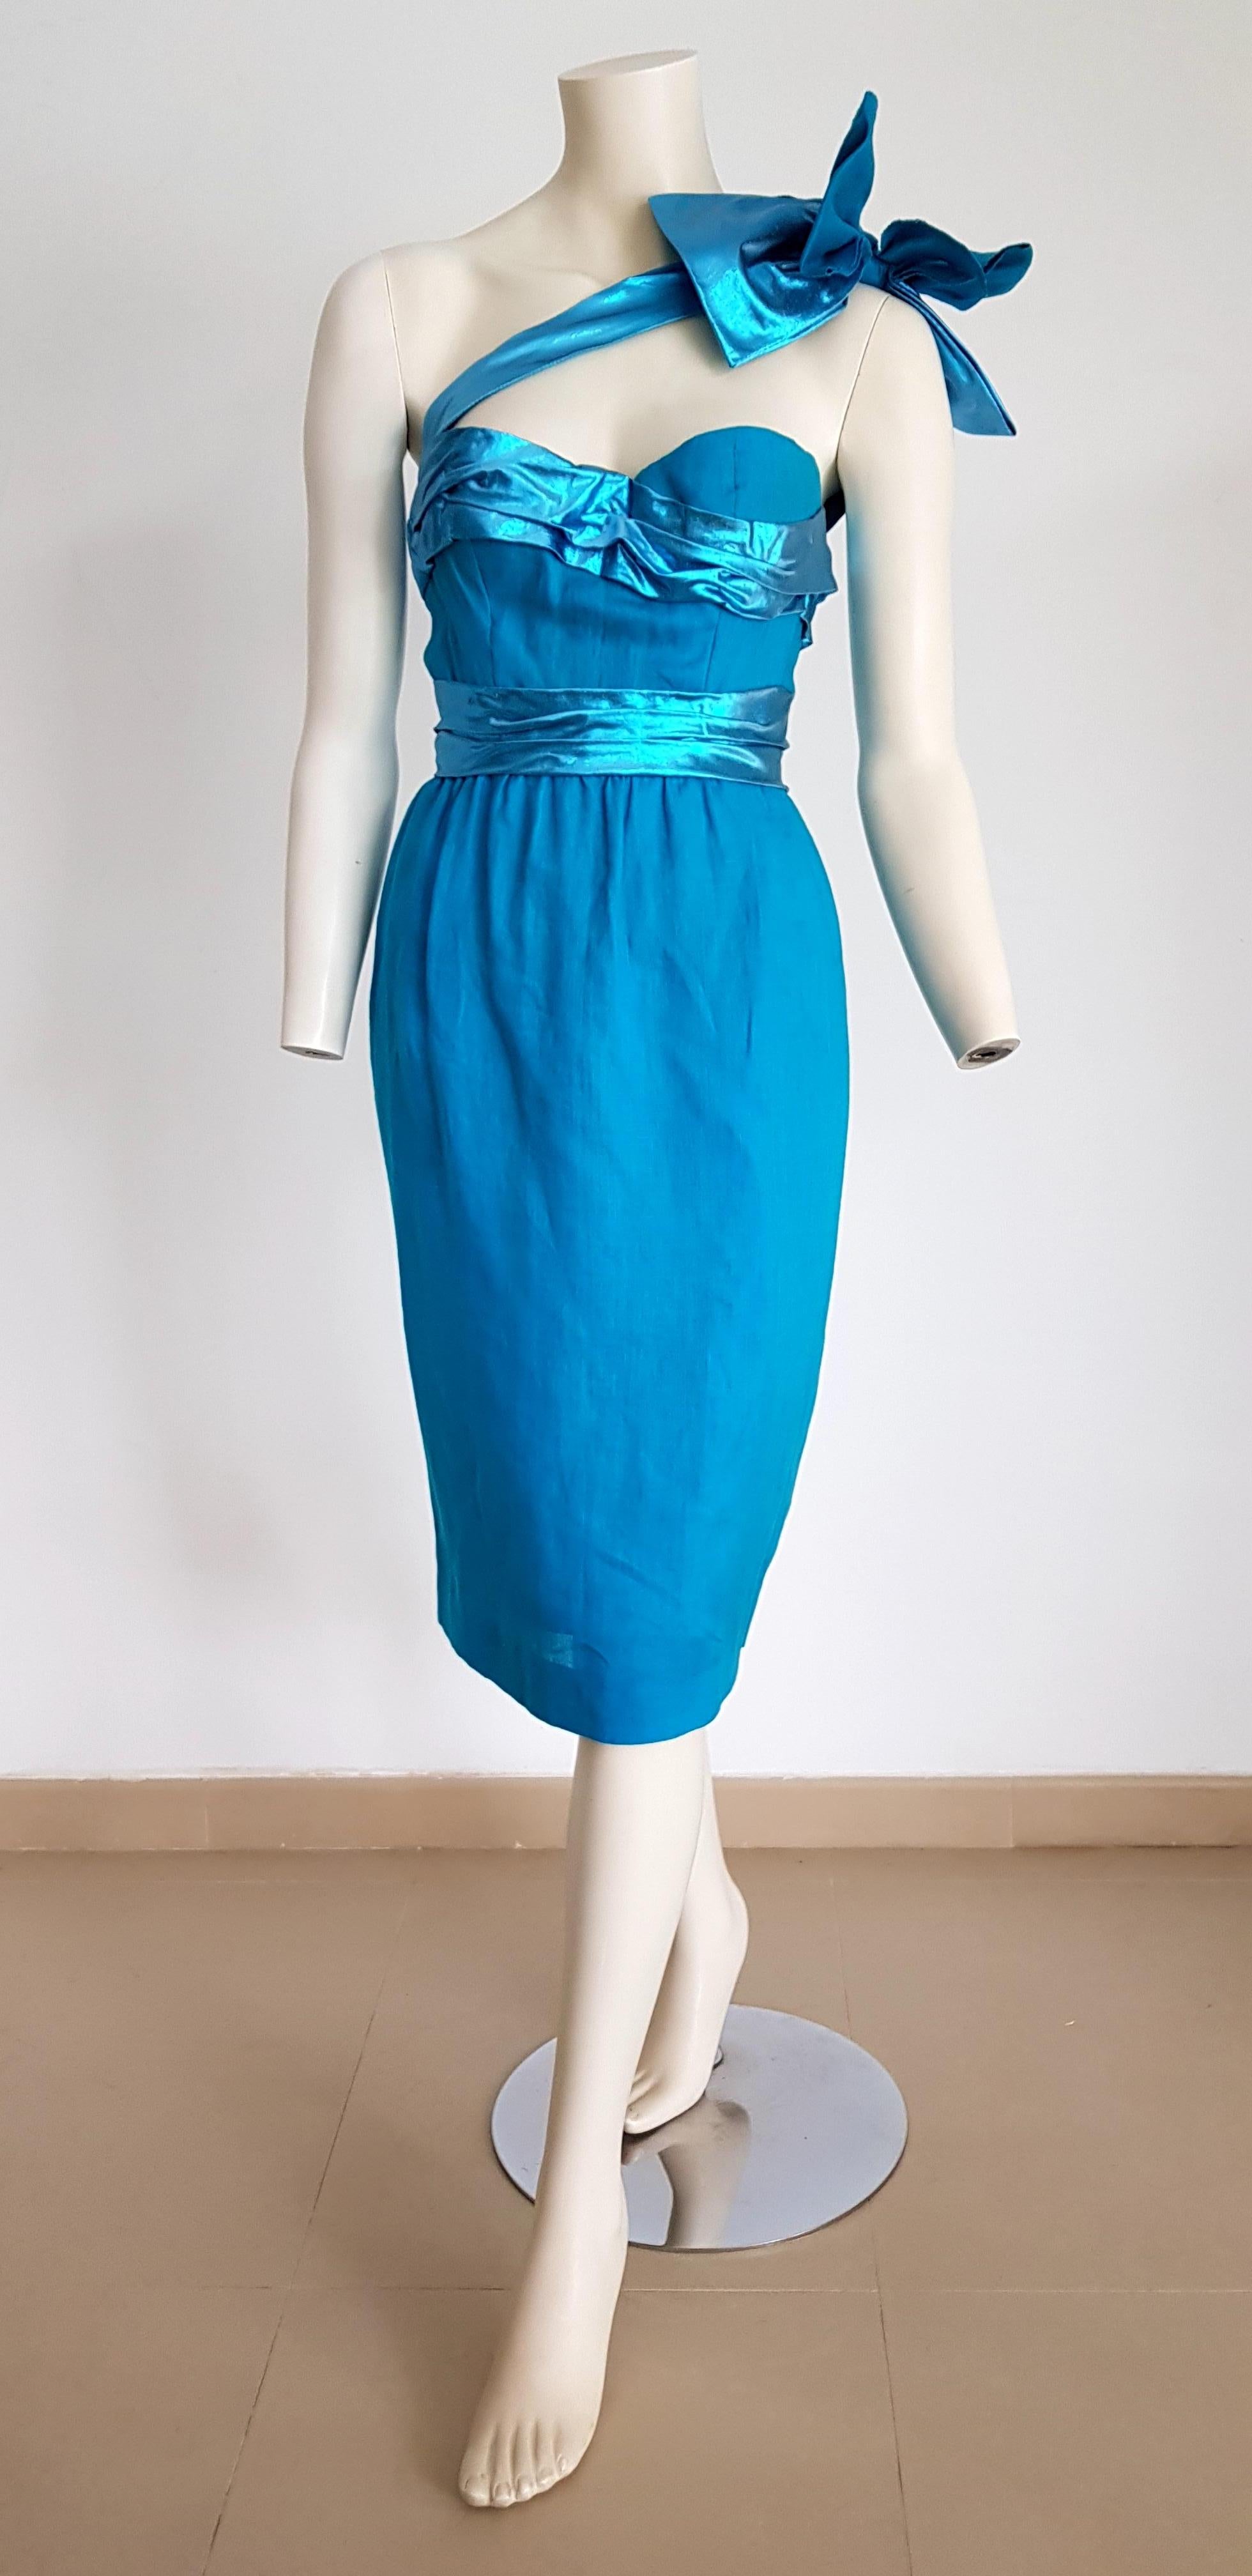 VALENTINO Haute Couture a Shoulder Strap Turquoise Evening Dress - Unworn, New.

SIZE: equivalent to about Small / Medium, please review approx measurements as follows in cm: lenght 104, chest underarm to underarm 50, bust circumference 89, waist